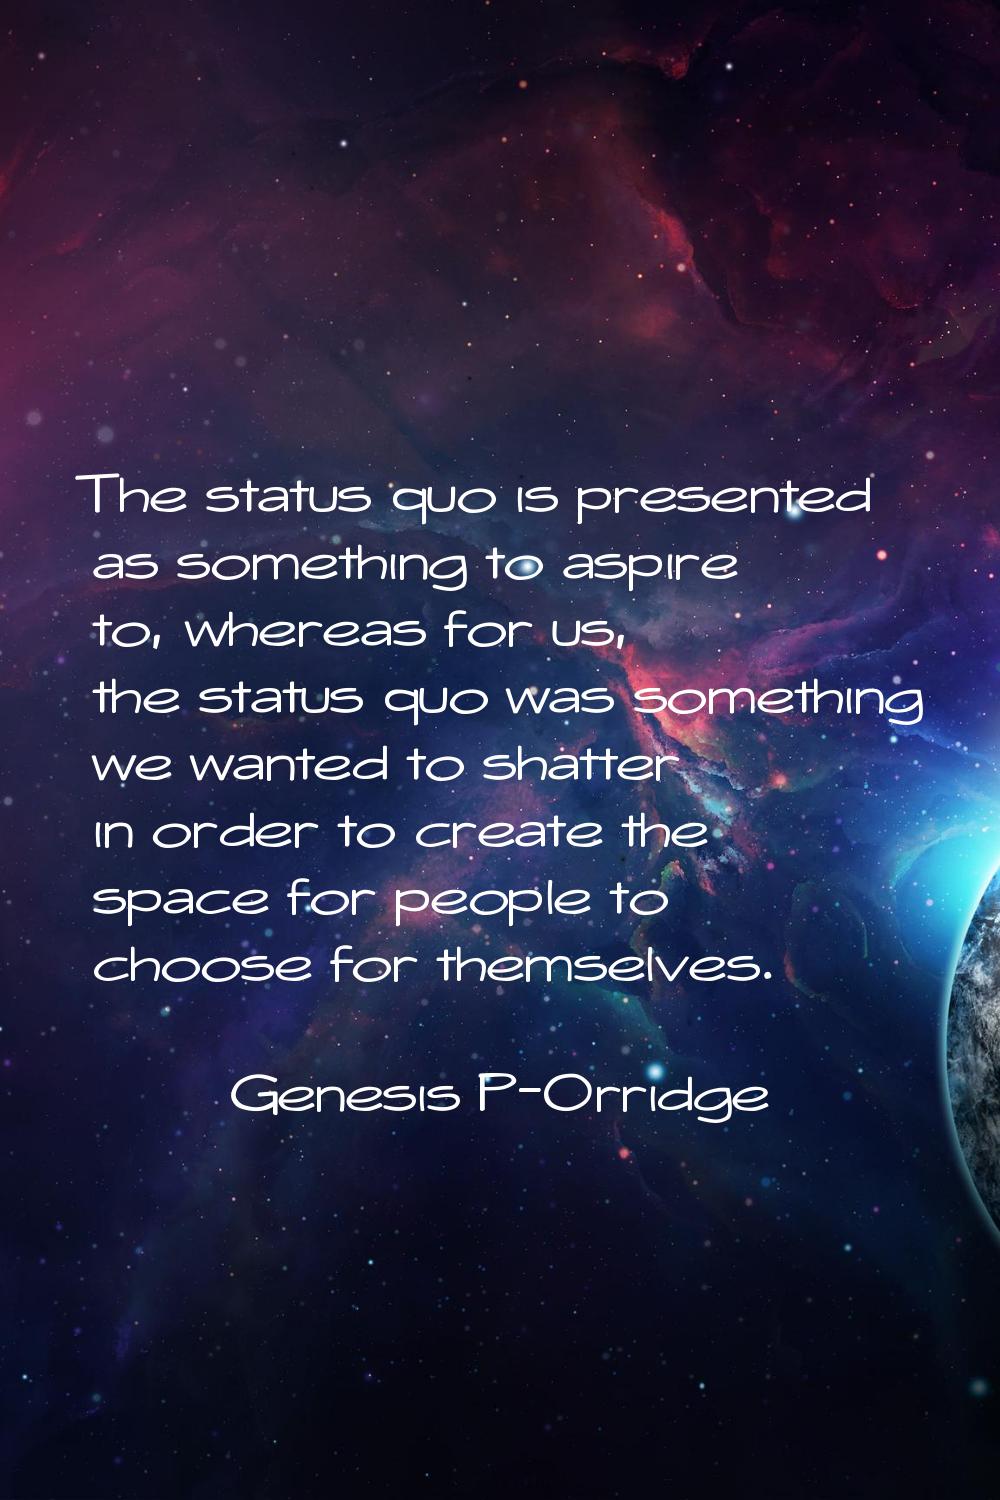 The status quo is presented as something to aspire to, whereas for us, the status quo was something